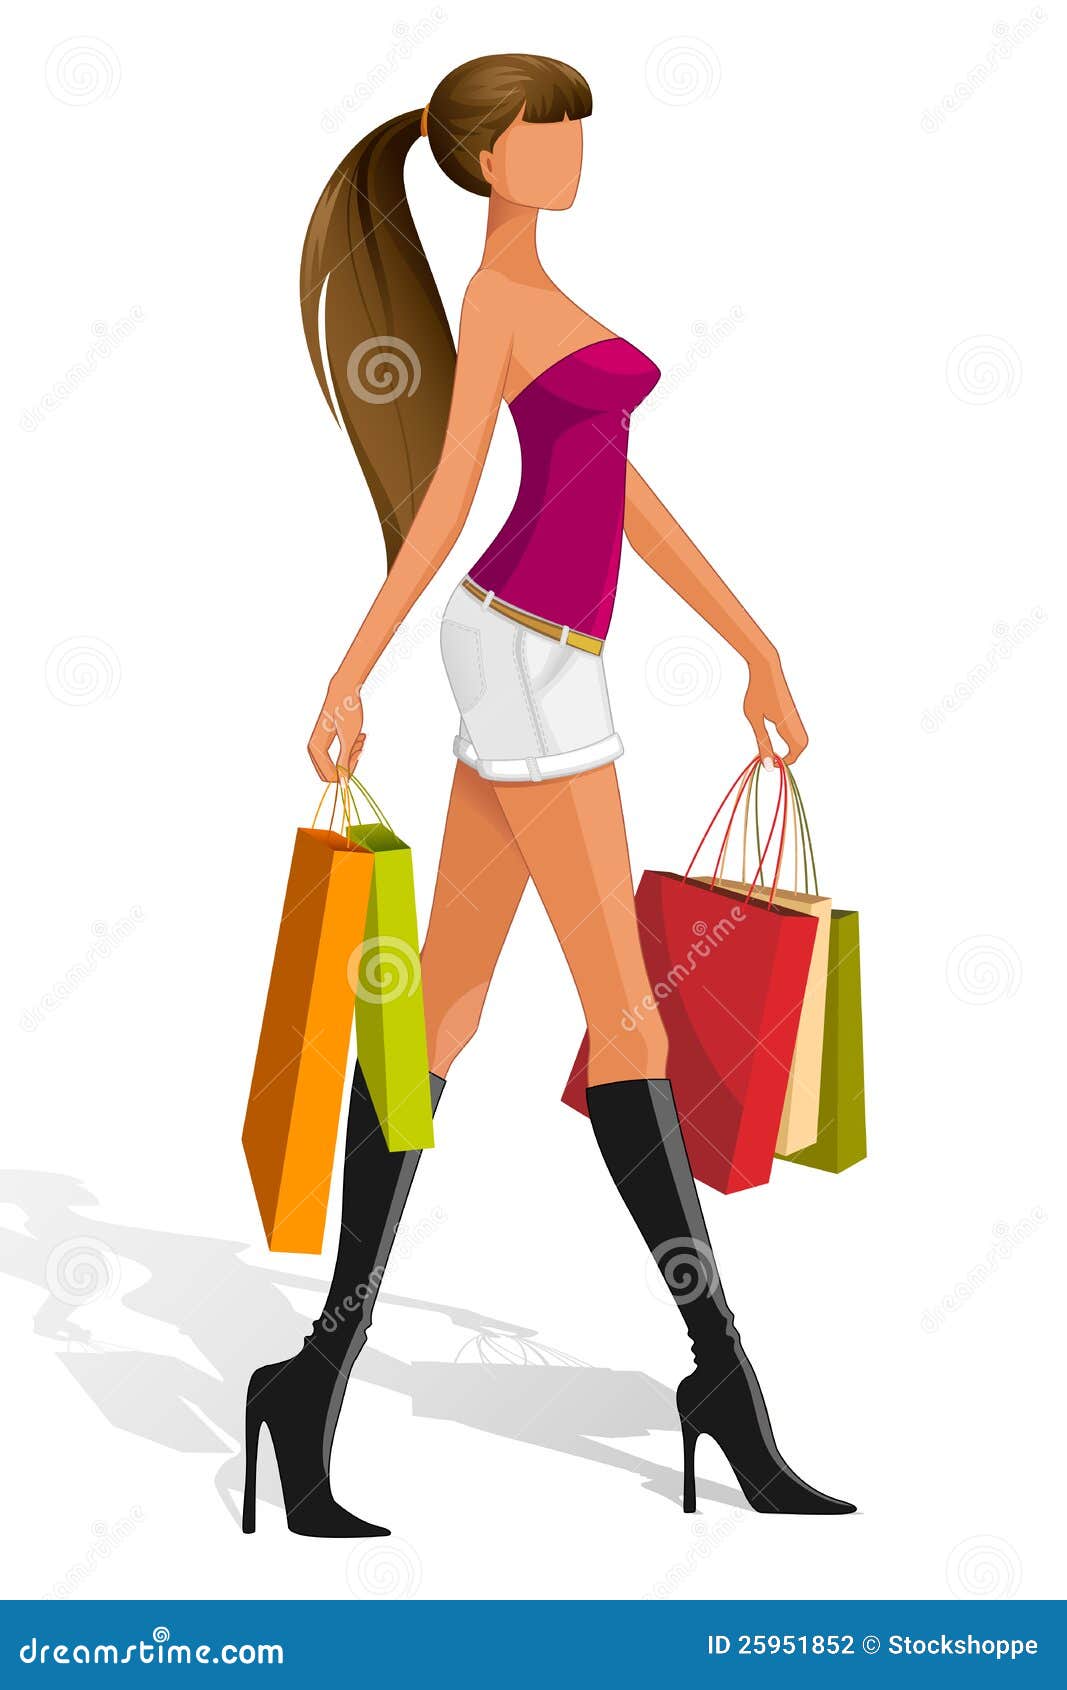 Lady with Shopping Bag stock vector. Illustration of female - 25951852